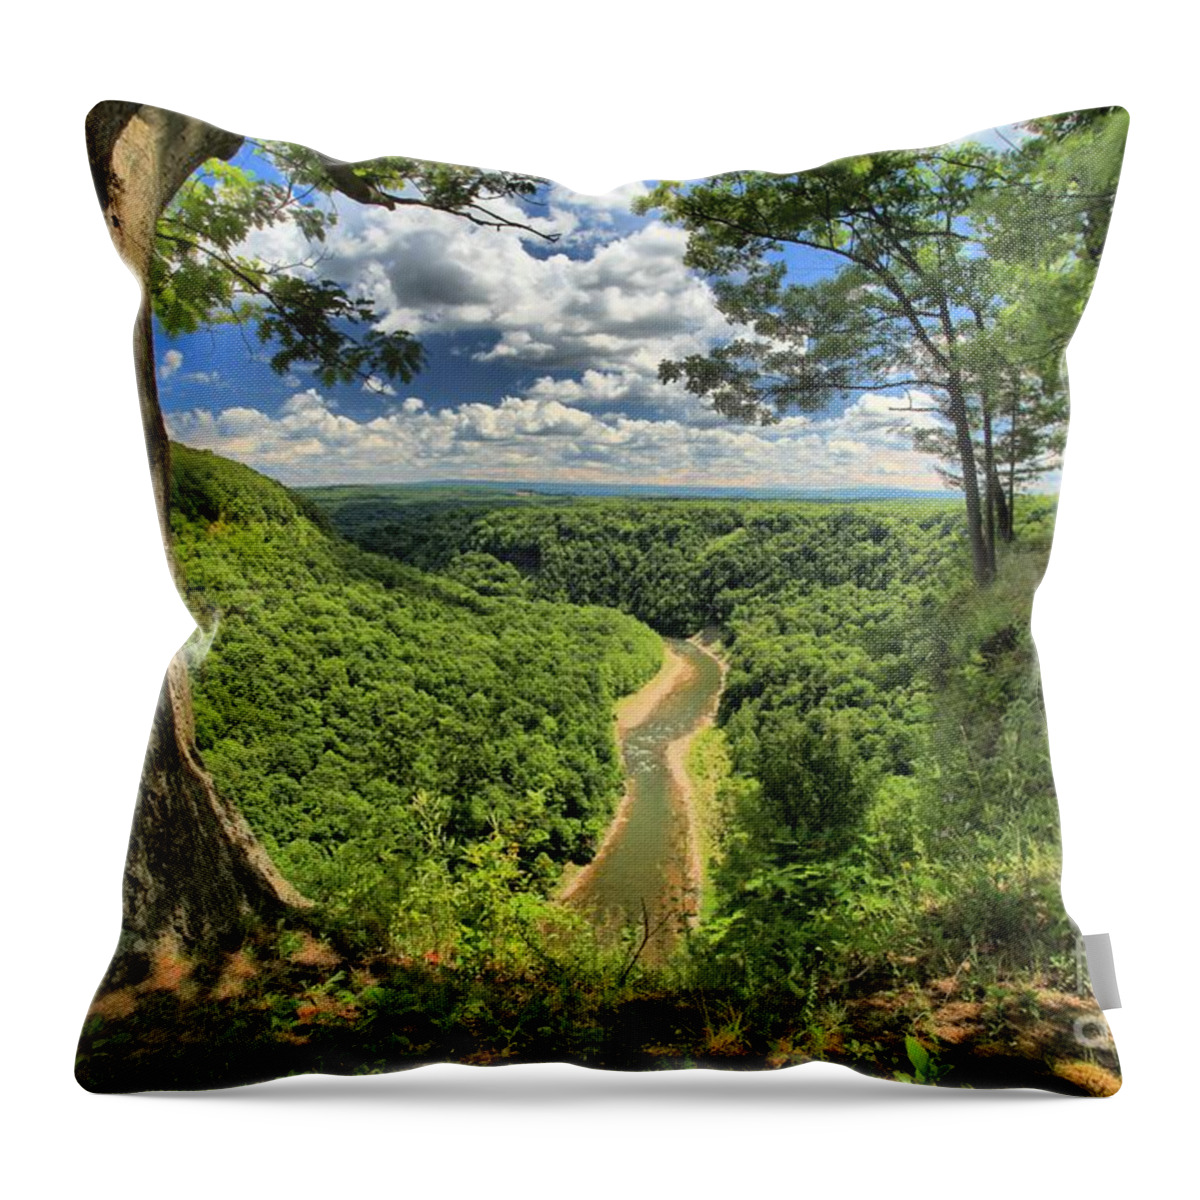 Letchworth State Park Throw Pillow featuring the photograph River In The Valley by Adam Jewell